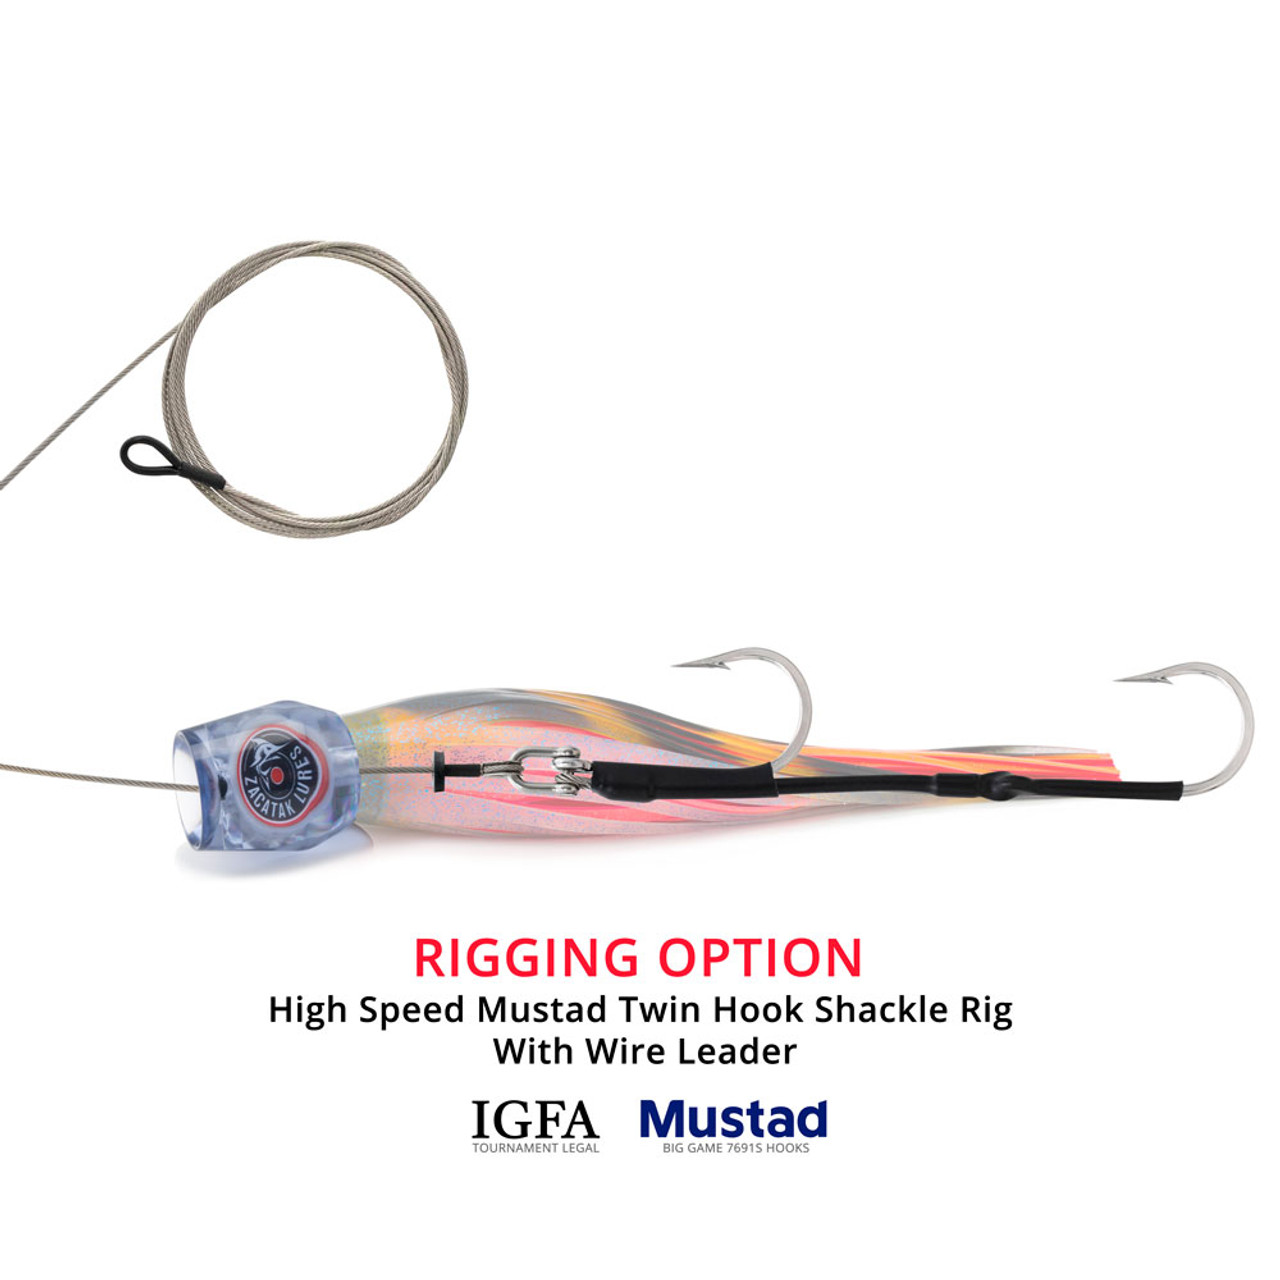 https://cdn11.bigcommerce.com/s-sv4r4mic/images/stencil/1280x1280/products/8994/48887/zacatak-lures-high-speed-rigging-option-twin-hook-shackle-rig-roach__42819.1671433873.jpg?c=2?imbypass=on